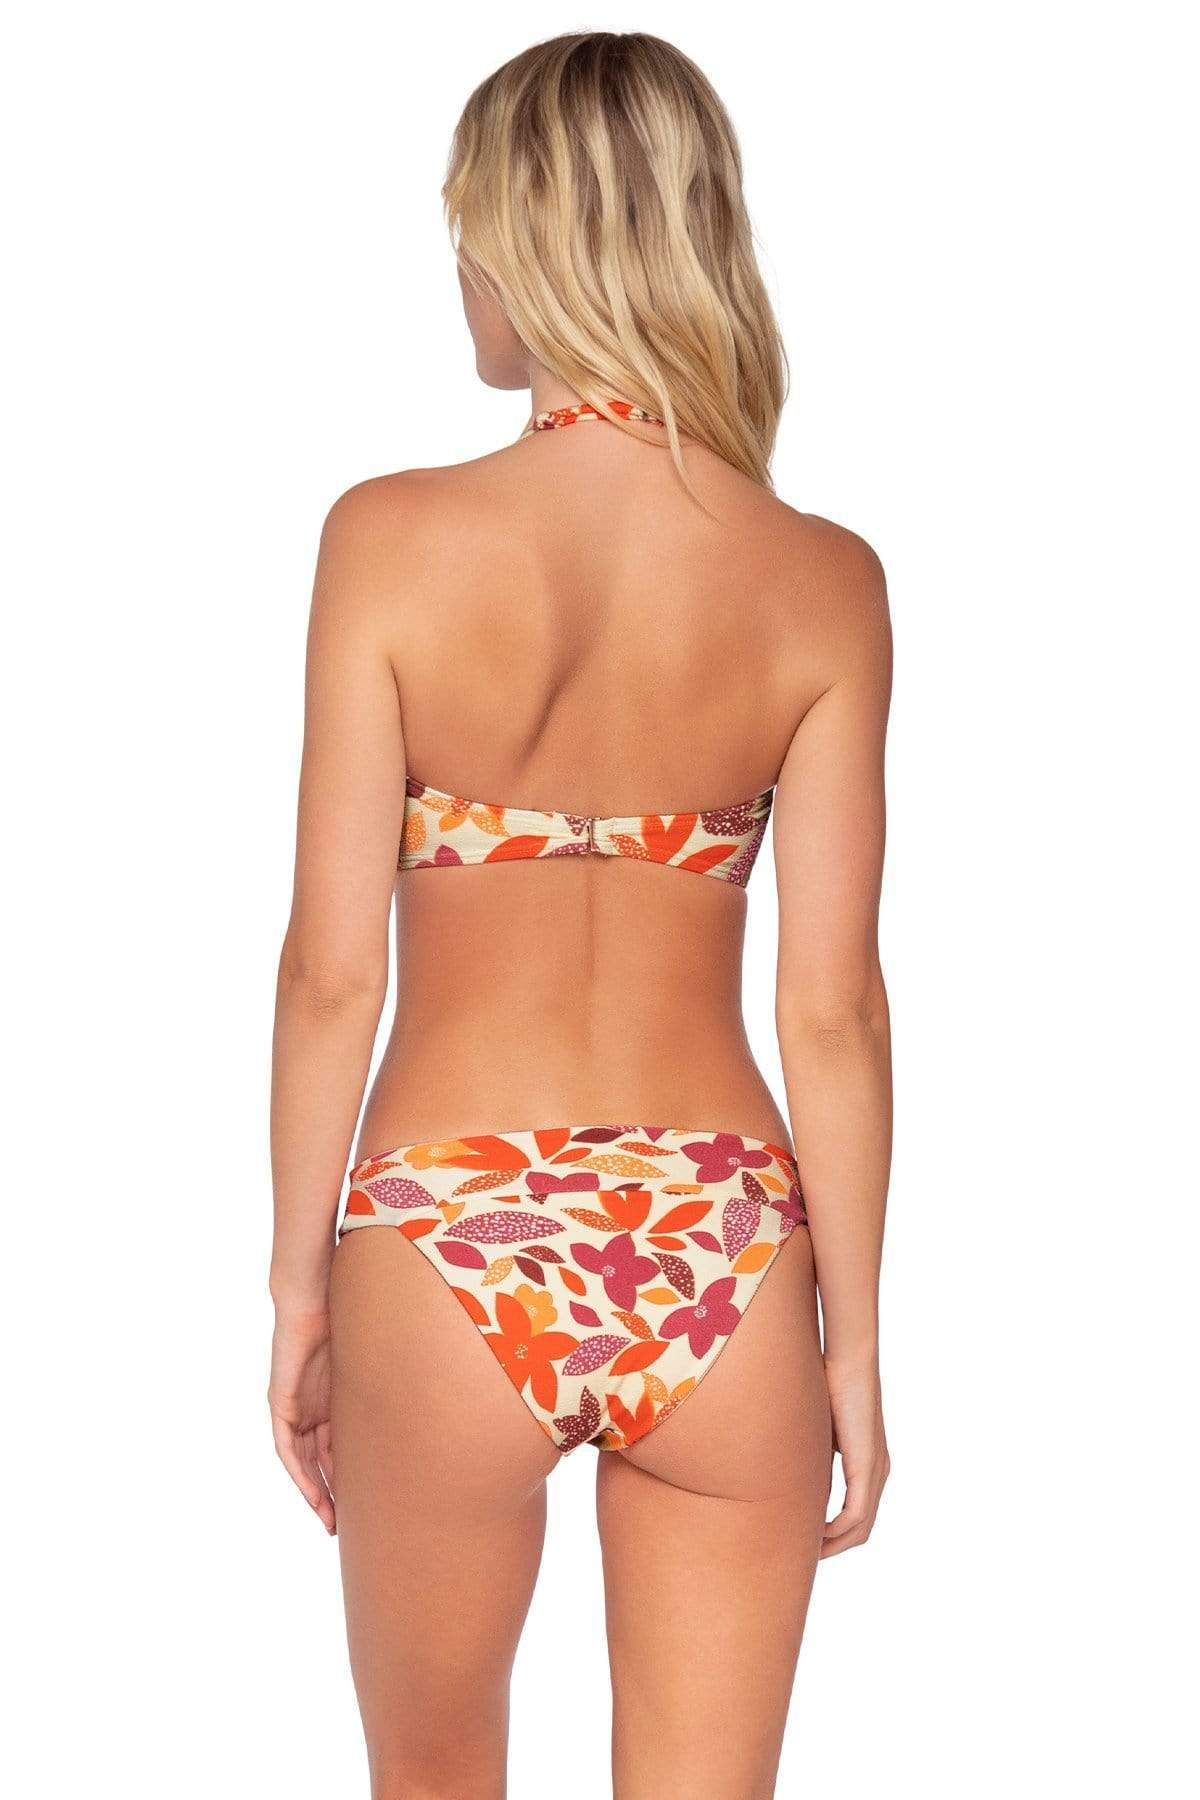 Bestswimwear -  Swim Systems Pressed Petals Bliss Banded Bottom